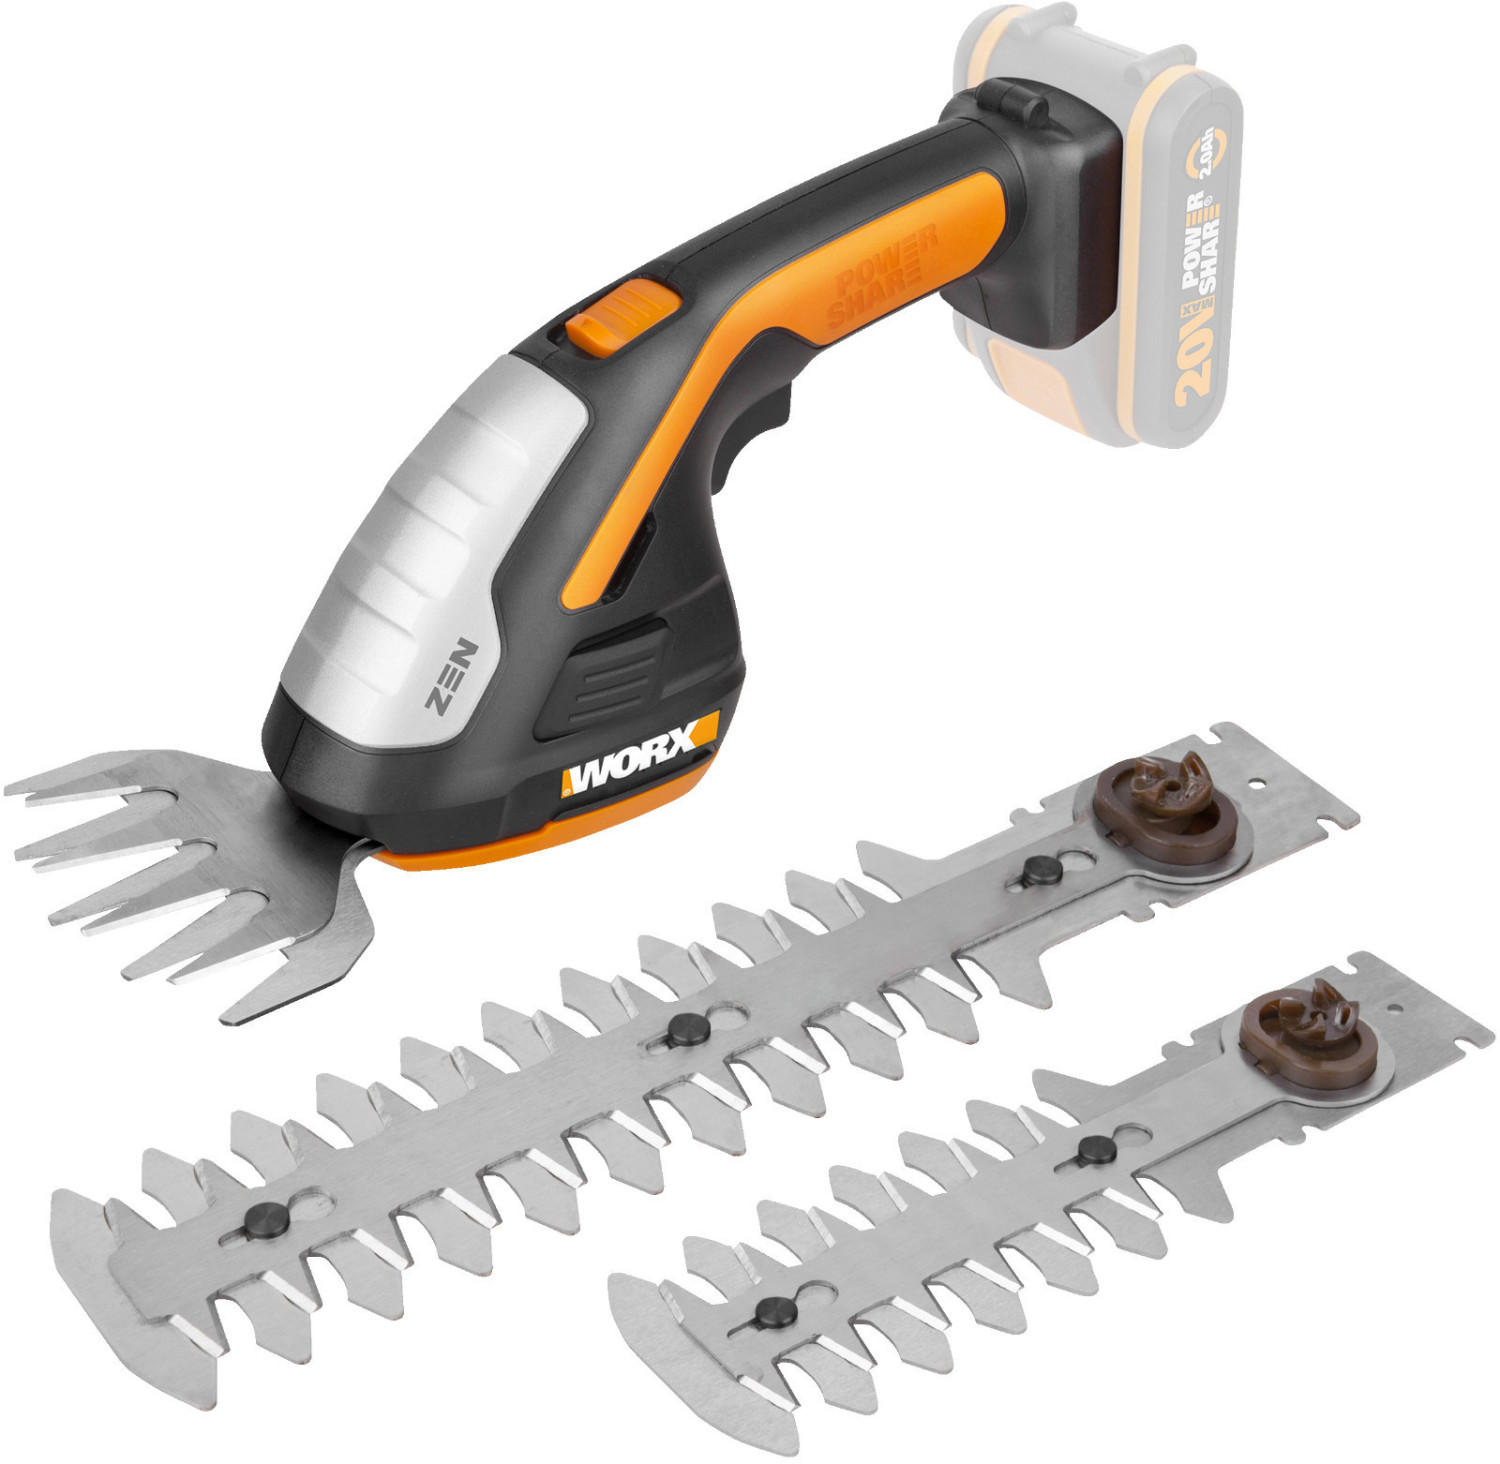 Worx WG801E.9 (without battery and charger)